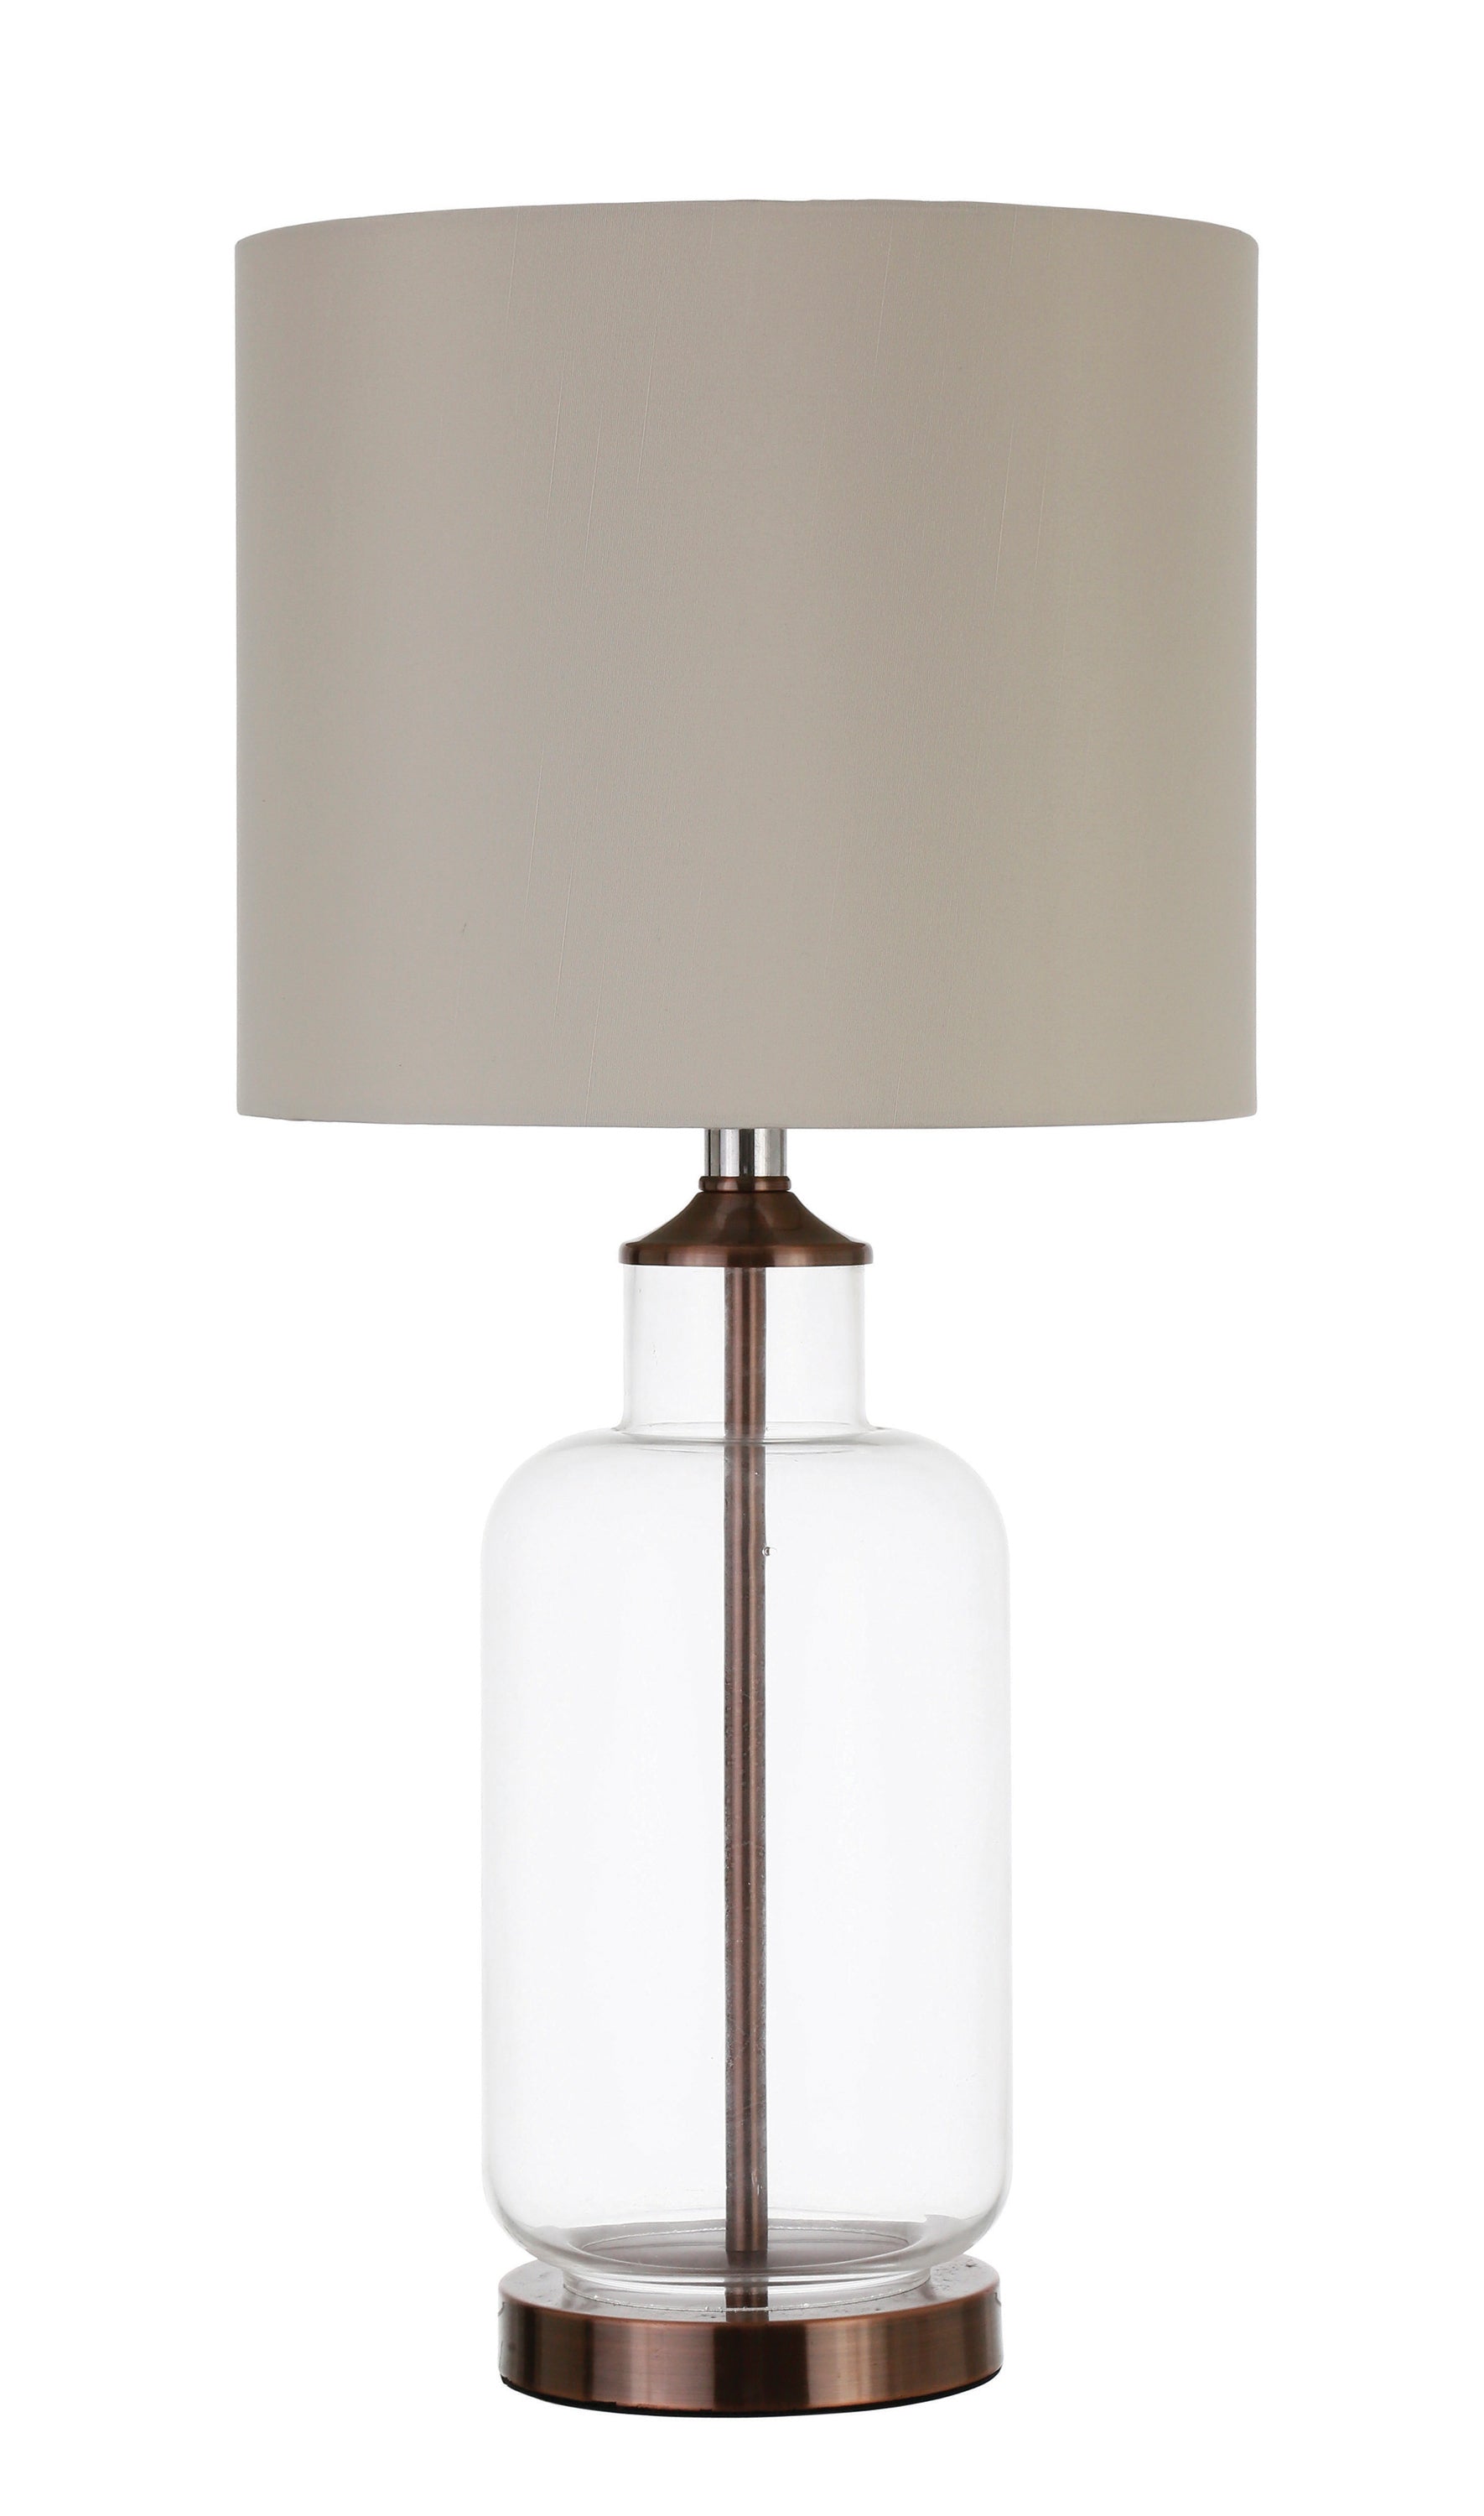 Drum Shade Table Lamp